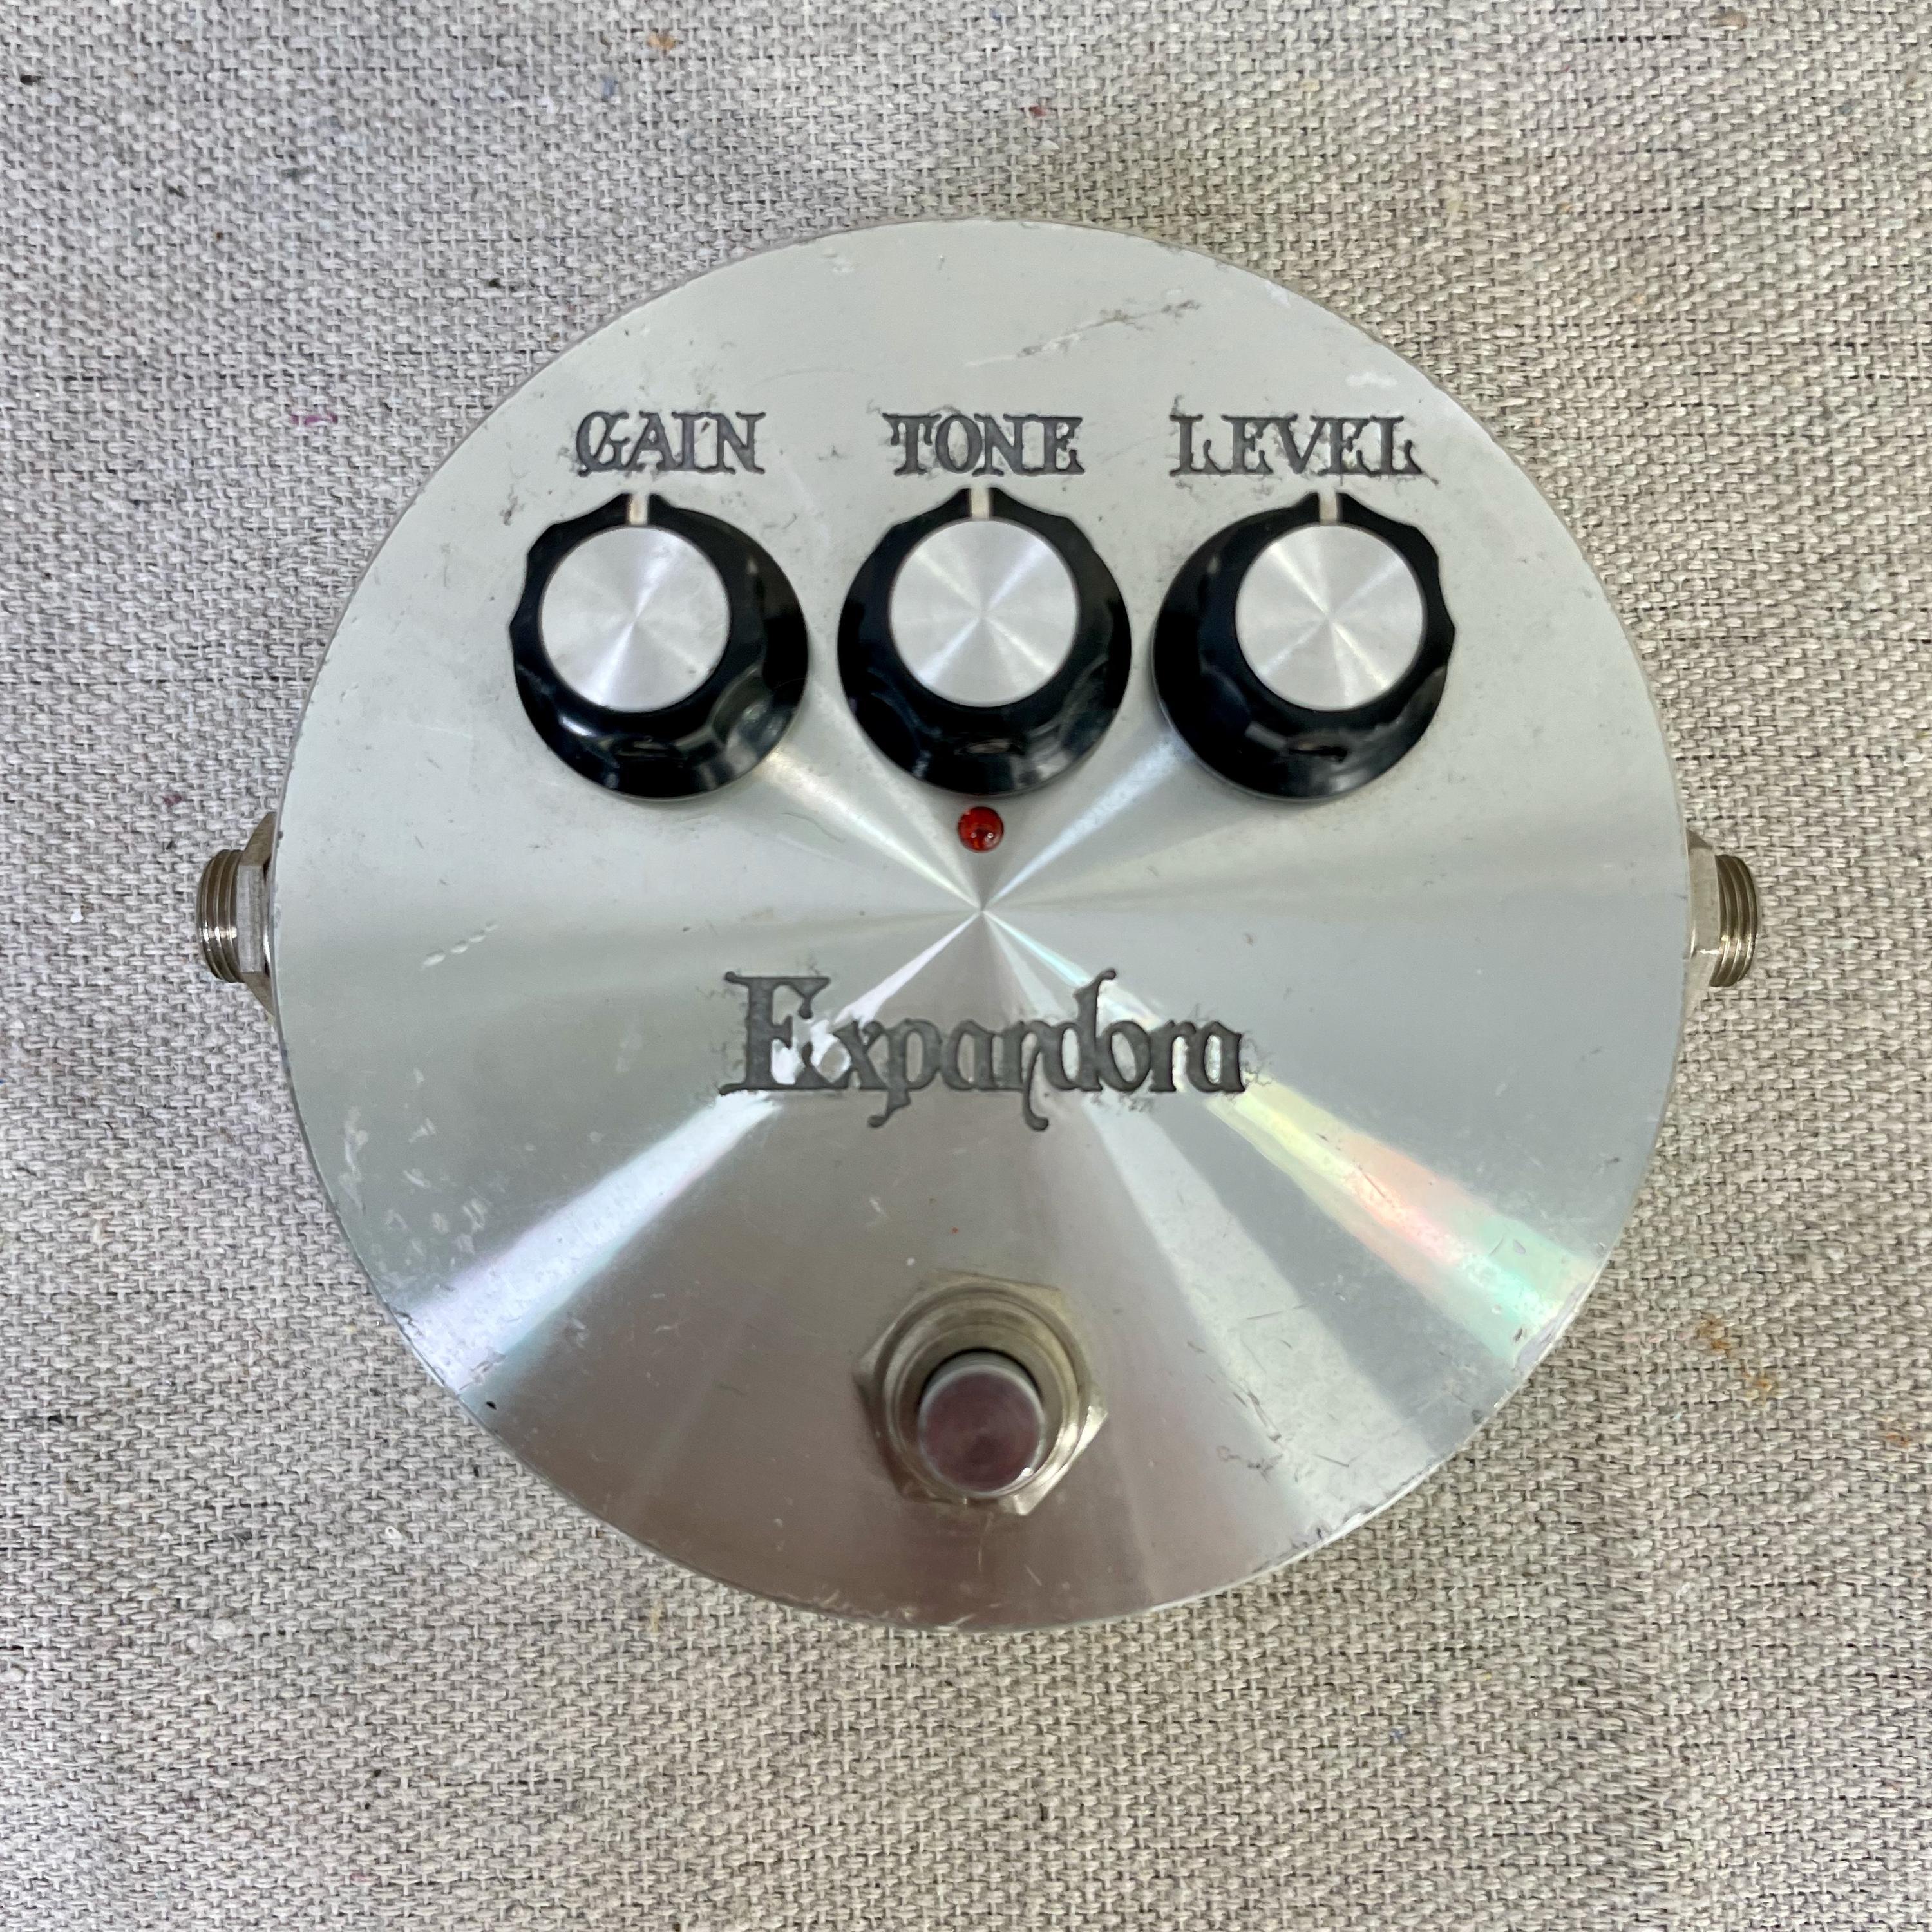 Used Bixonic EXP-2000 Expandora 1990s Silver Distortion Overdrive Fuzz  Billy Gibbons